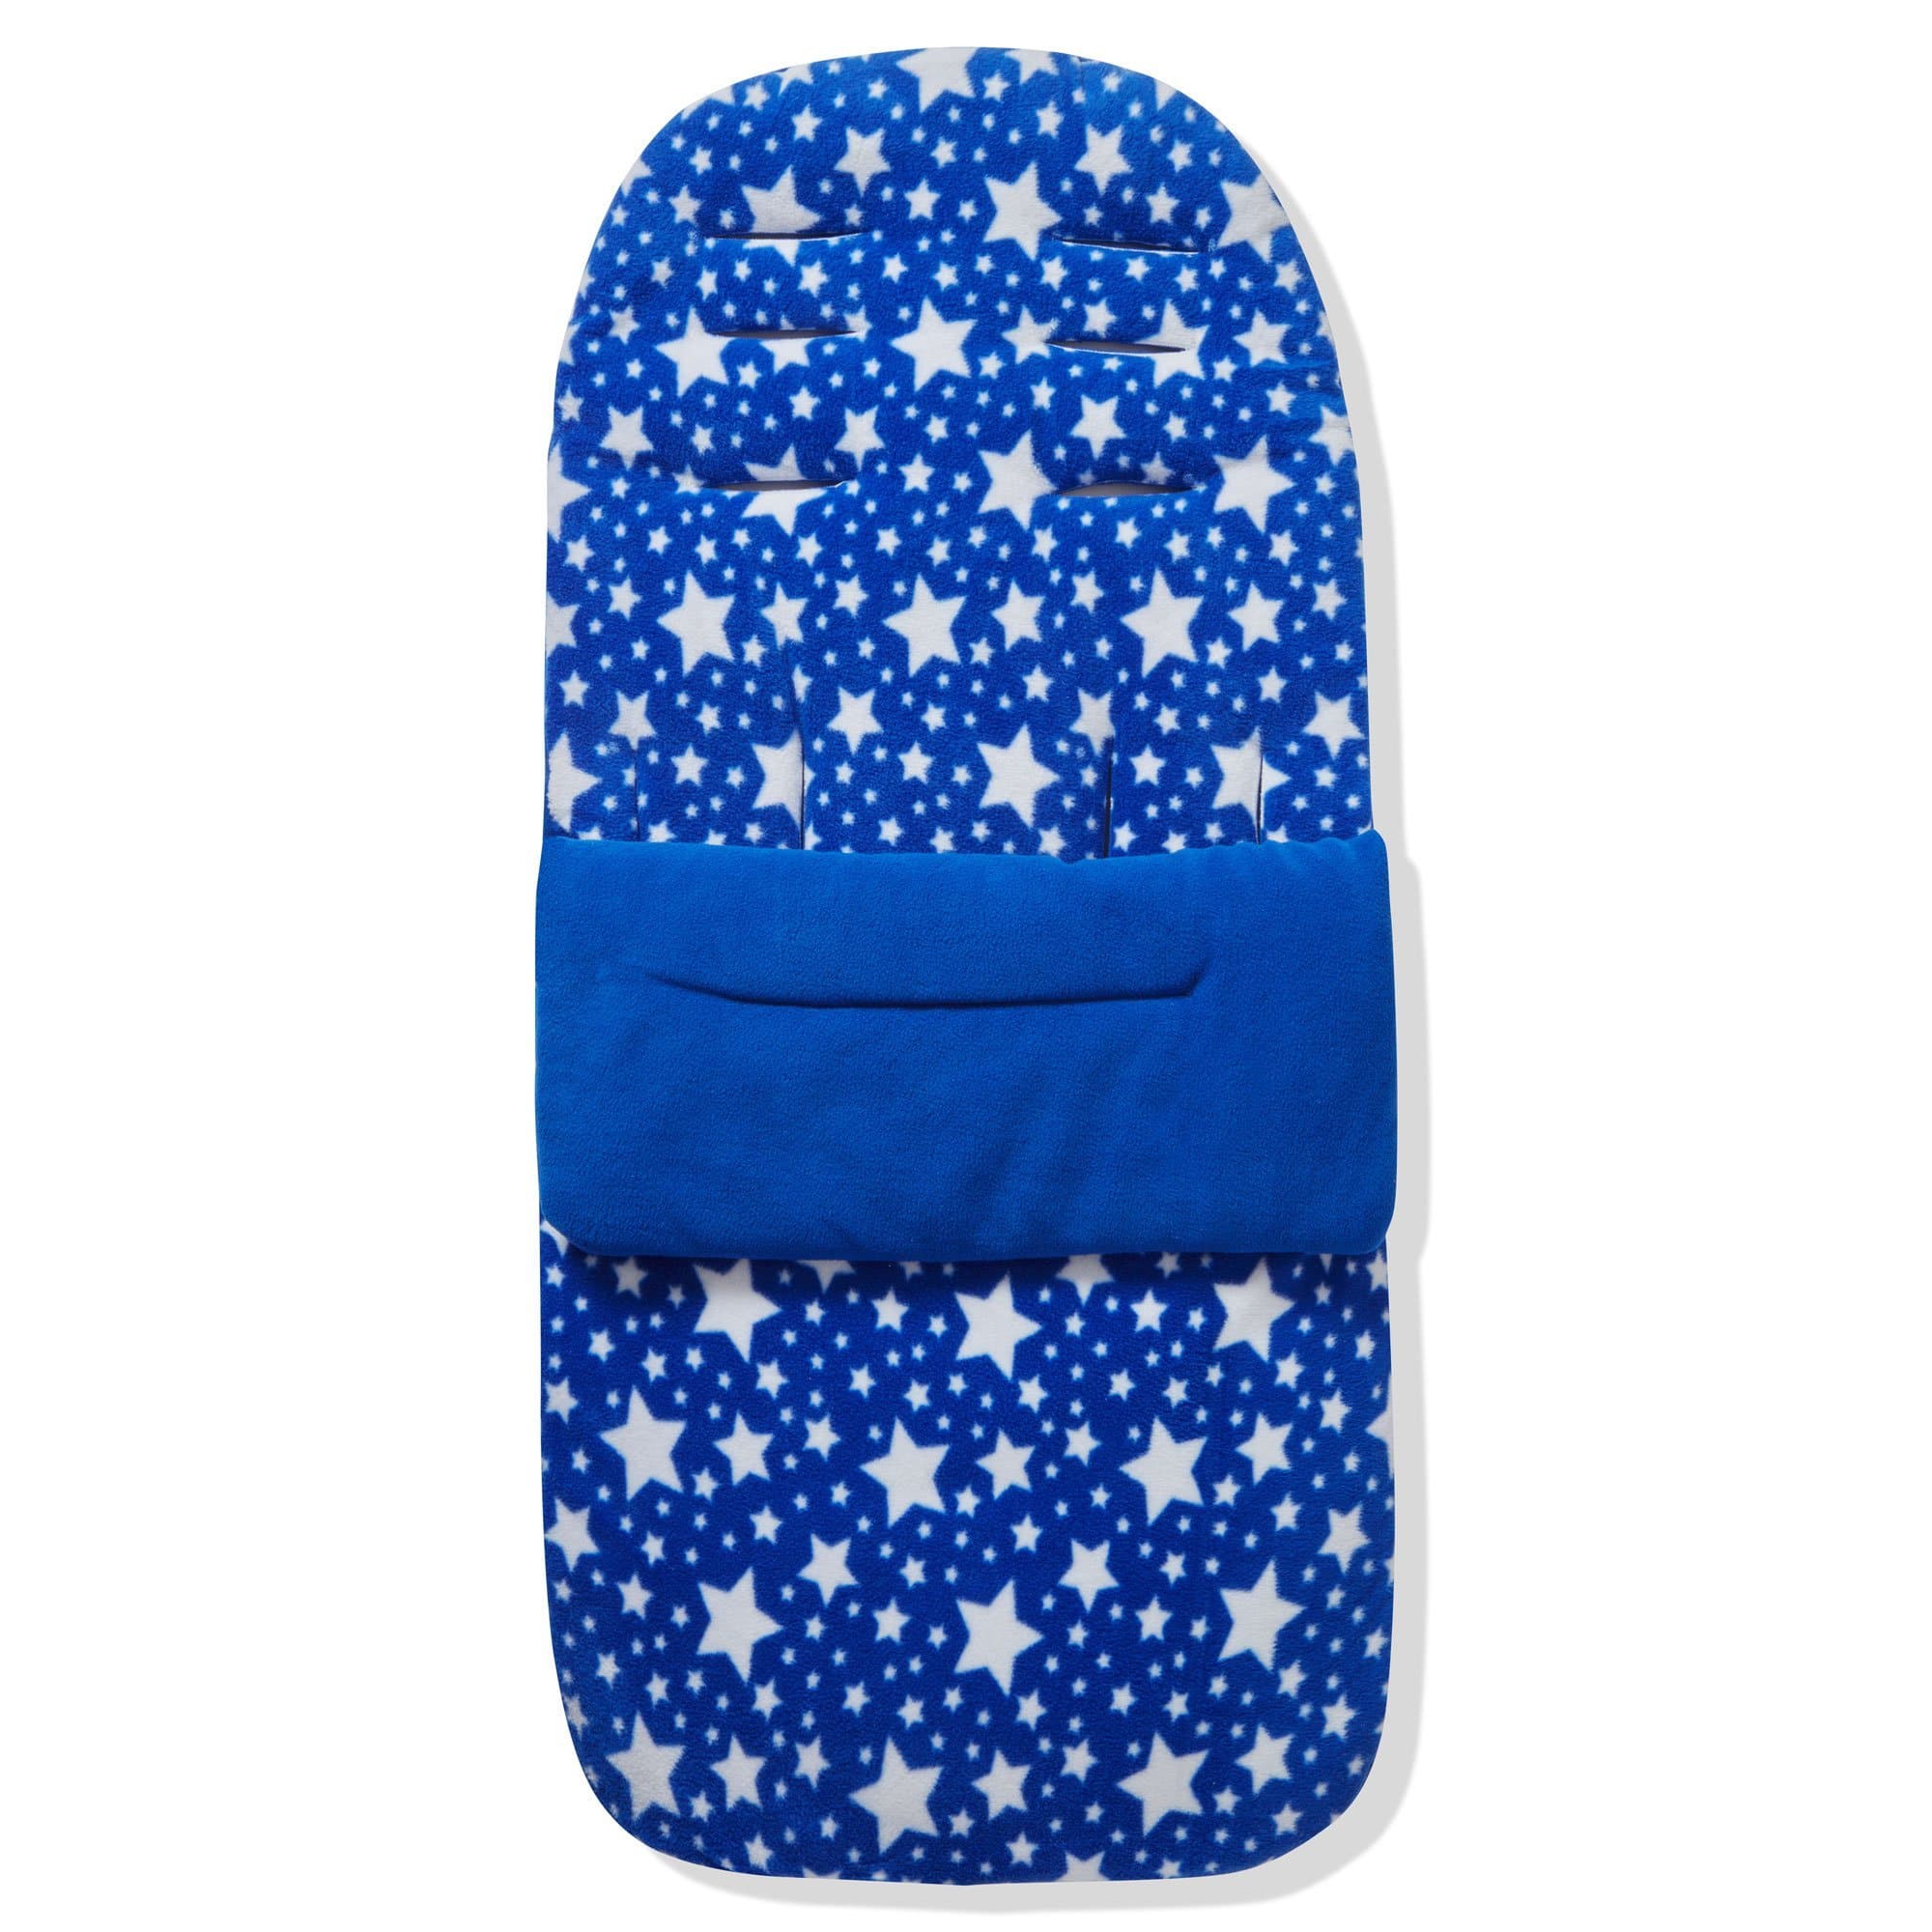 Fleece Footmuff / Cosy Toes Compatible With Easywalker - Blue Star / Fits All Models | For Your Little One